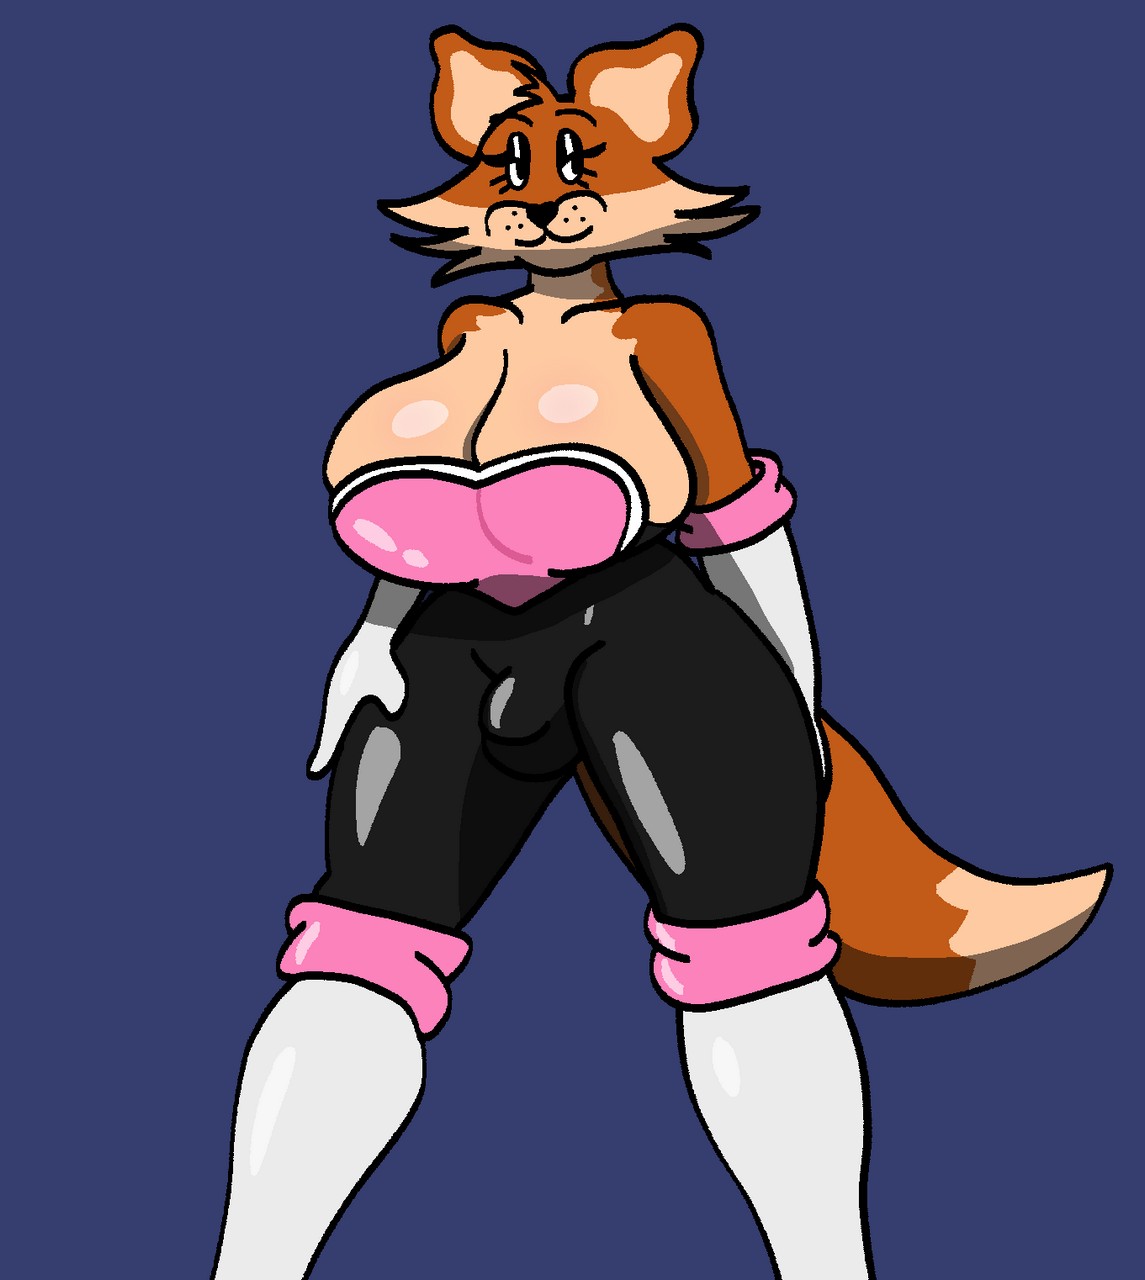 Karen The Fox Mexicommie Rouge The Bat By Mexicommi